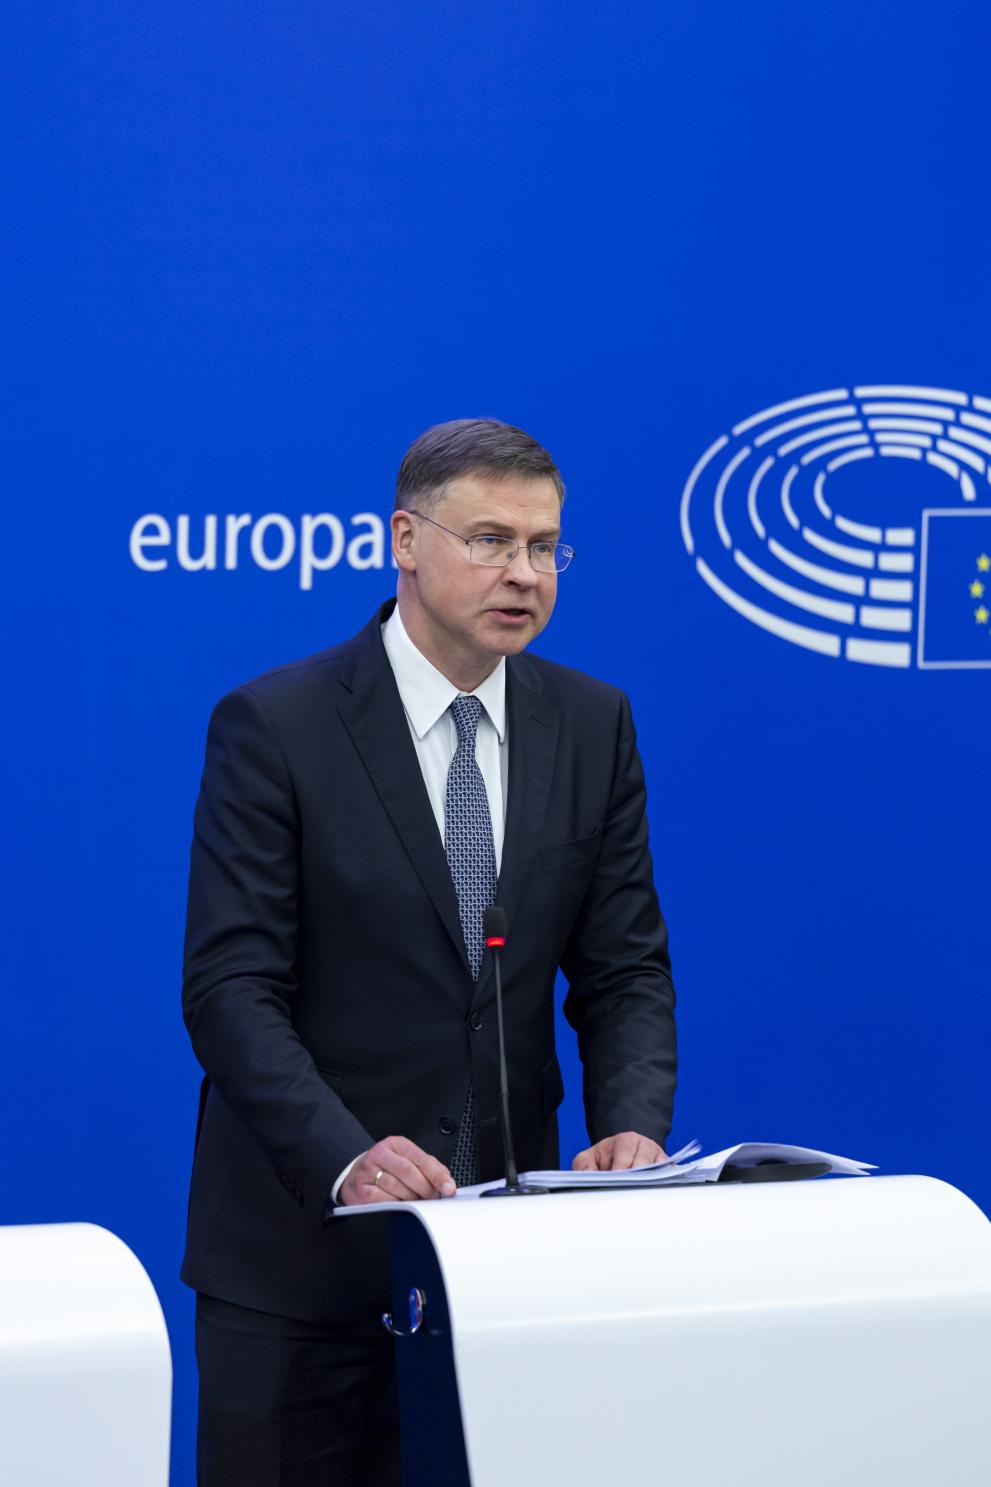 Read-out of the weekly meeting of the von der Leyen Commission by Valdis Dombrovskis, Executive Vice-President, and Mairead McGuinness, European Commissioner, on the Communication on a sustainable finance framework